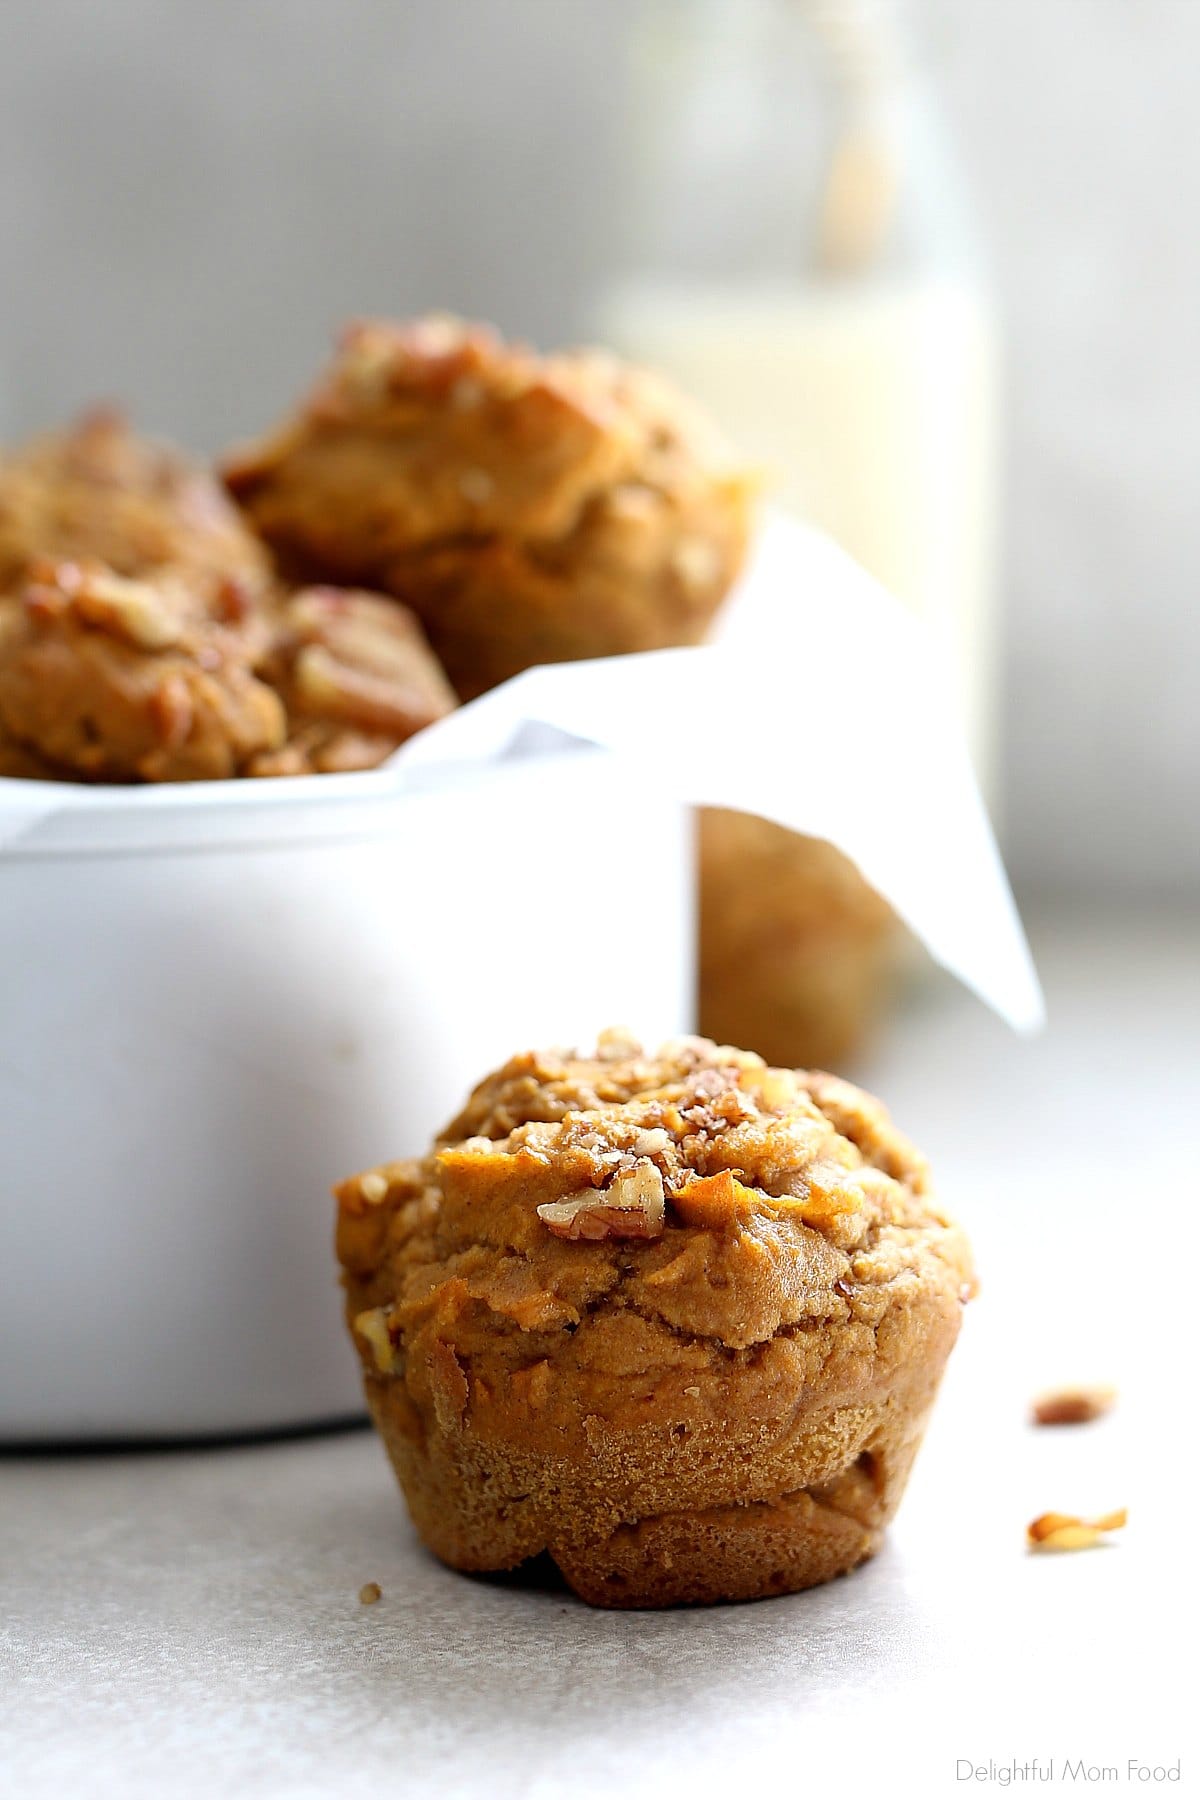 Gluten Free Pumpkin Muffins you will fall in love with and want to eat for days! Naturally dairy-free healthy muffins made with gluten free flours (with a grain free option), coconut sugar, pumpkin and comforting spices! #glutenfreepumpkinmuffins #pumpkinmuffins #baking #glutenfree #easymuffins #kidfriendly #pumpkin #dairyfreeglutenfree #dairyfree #snacks #breakfast #muffins | Recipe at Delightful Mom Food